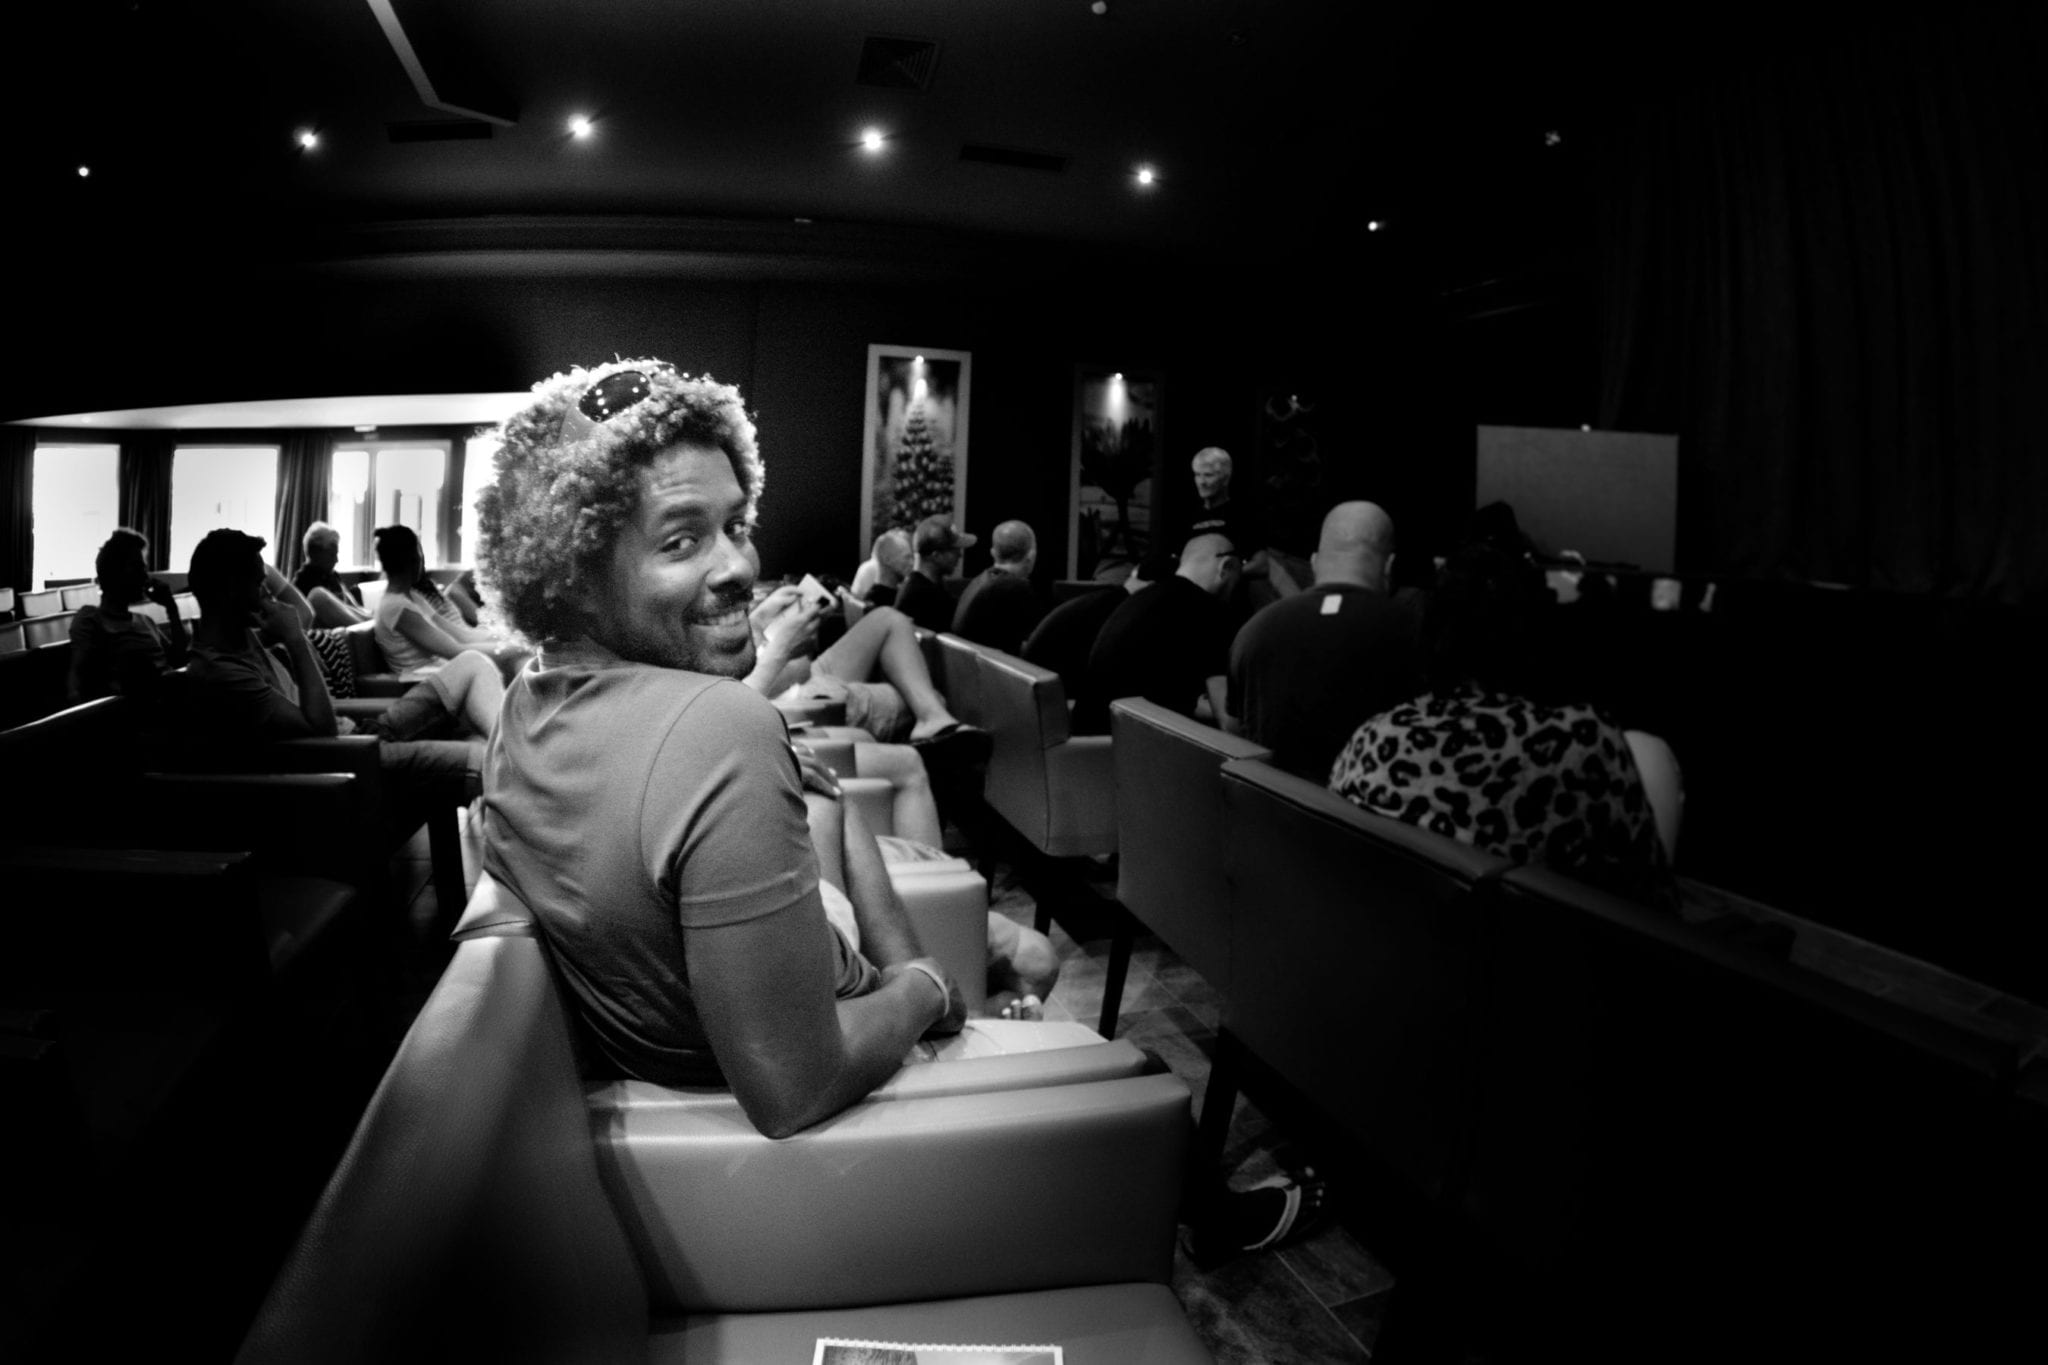 Mitu is all smiles in the midst of a product presentation at F-One’s importer meeting. // Photo Brendan Richards